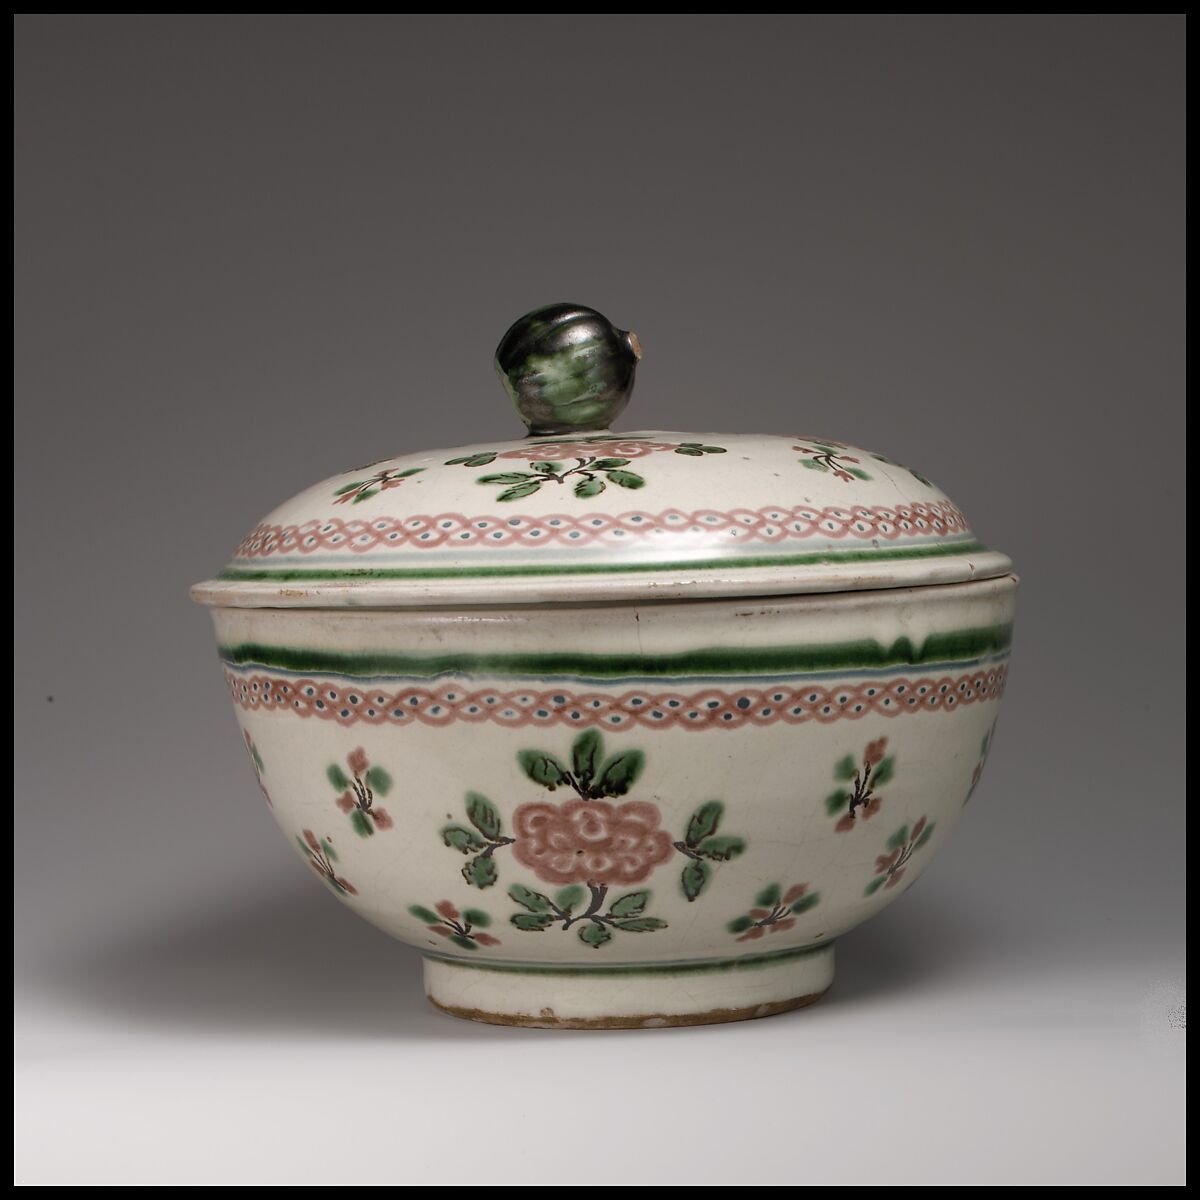 Covered Bowl, Tin-glazed earthenware, Mexican 